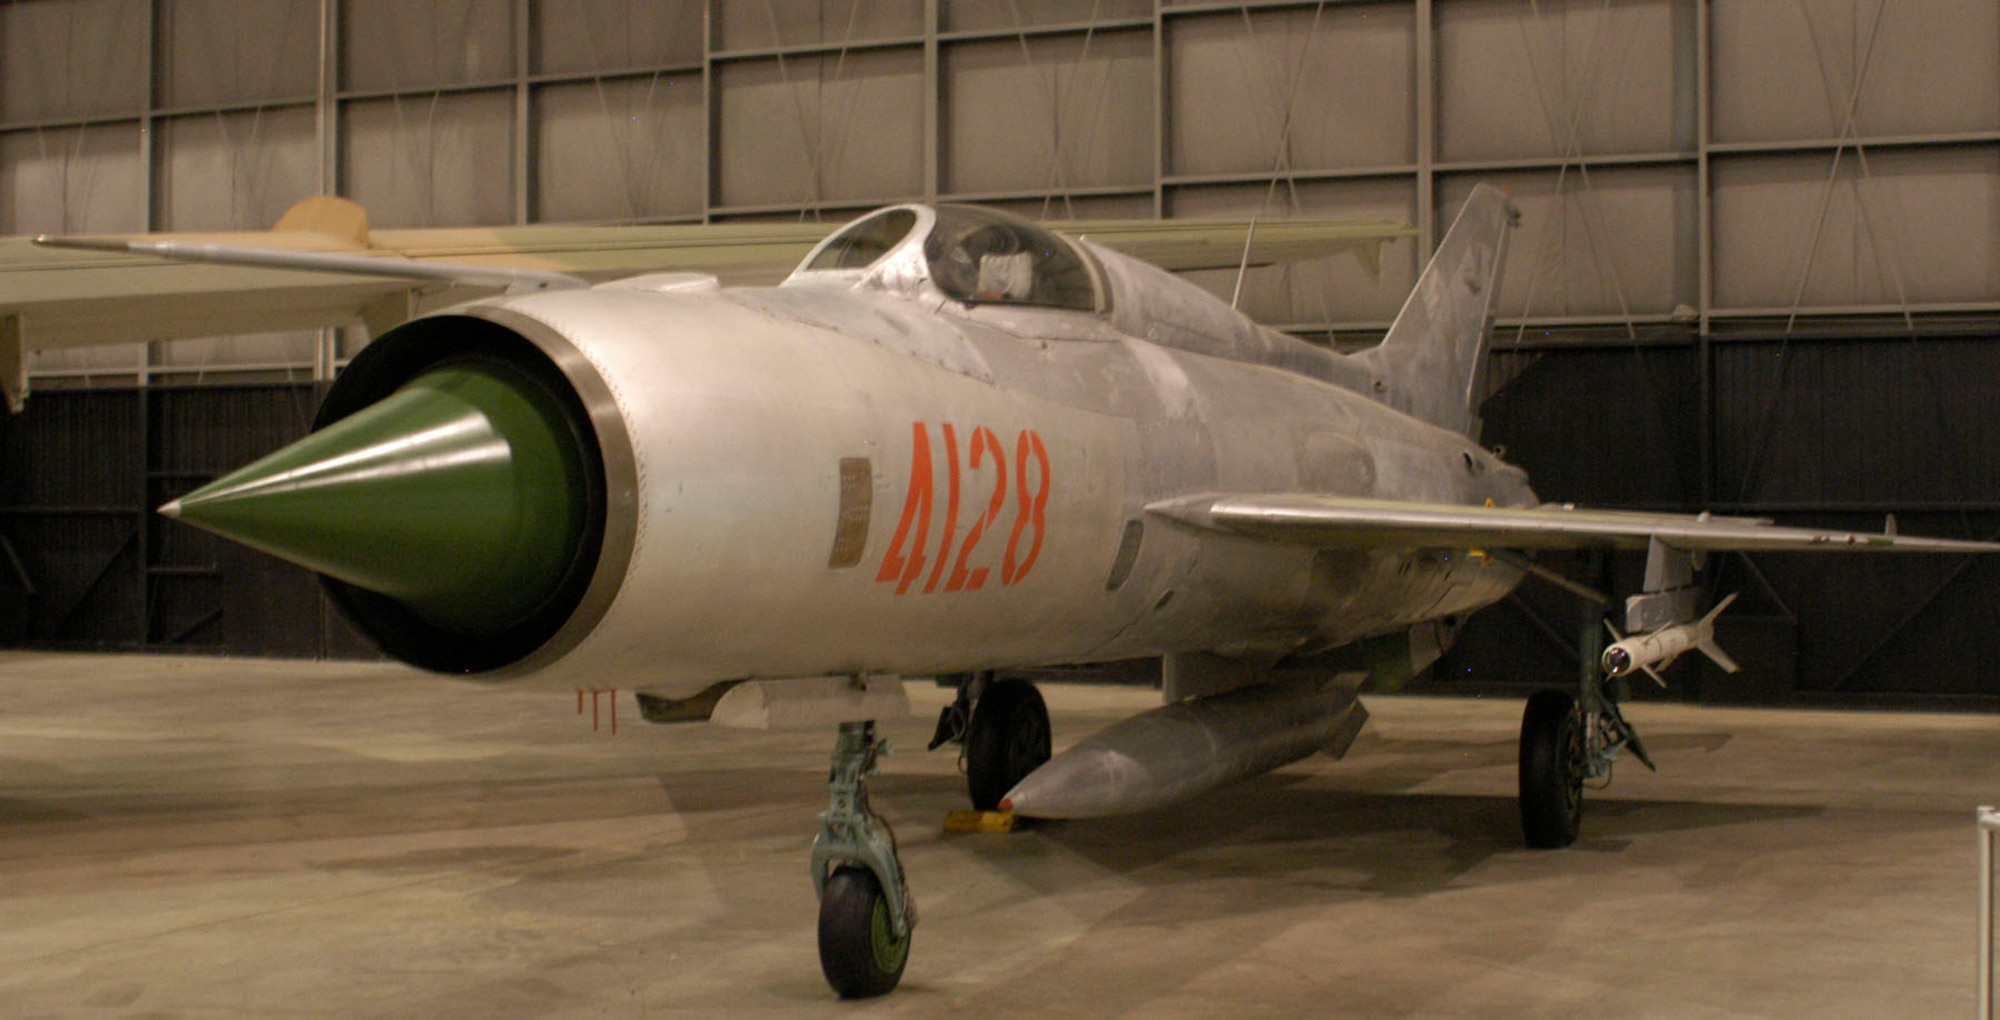 MiG-21 in the Southeast Asia War Gallery at the National Museum of the U.S. Air Force. (U.S. Air Force Photo)
